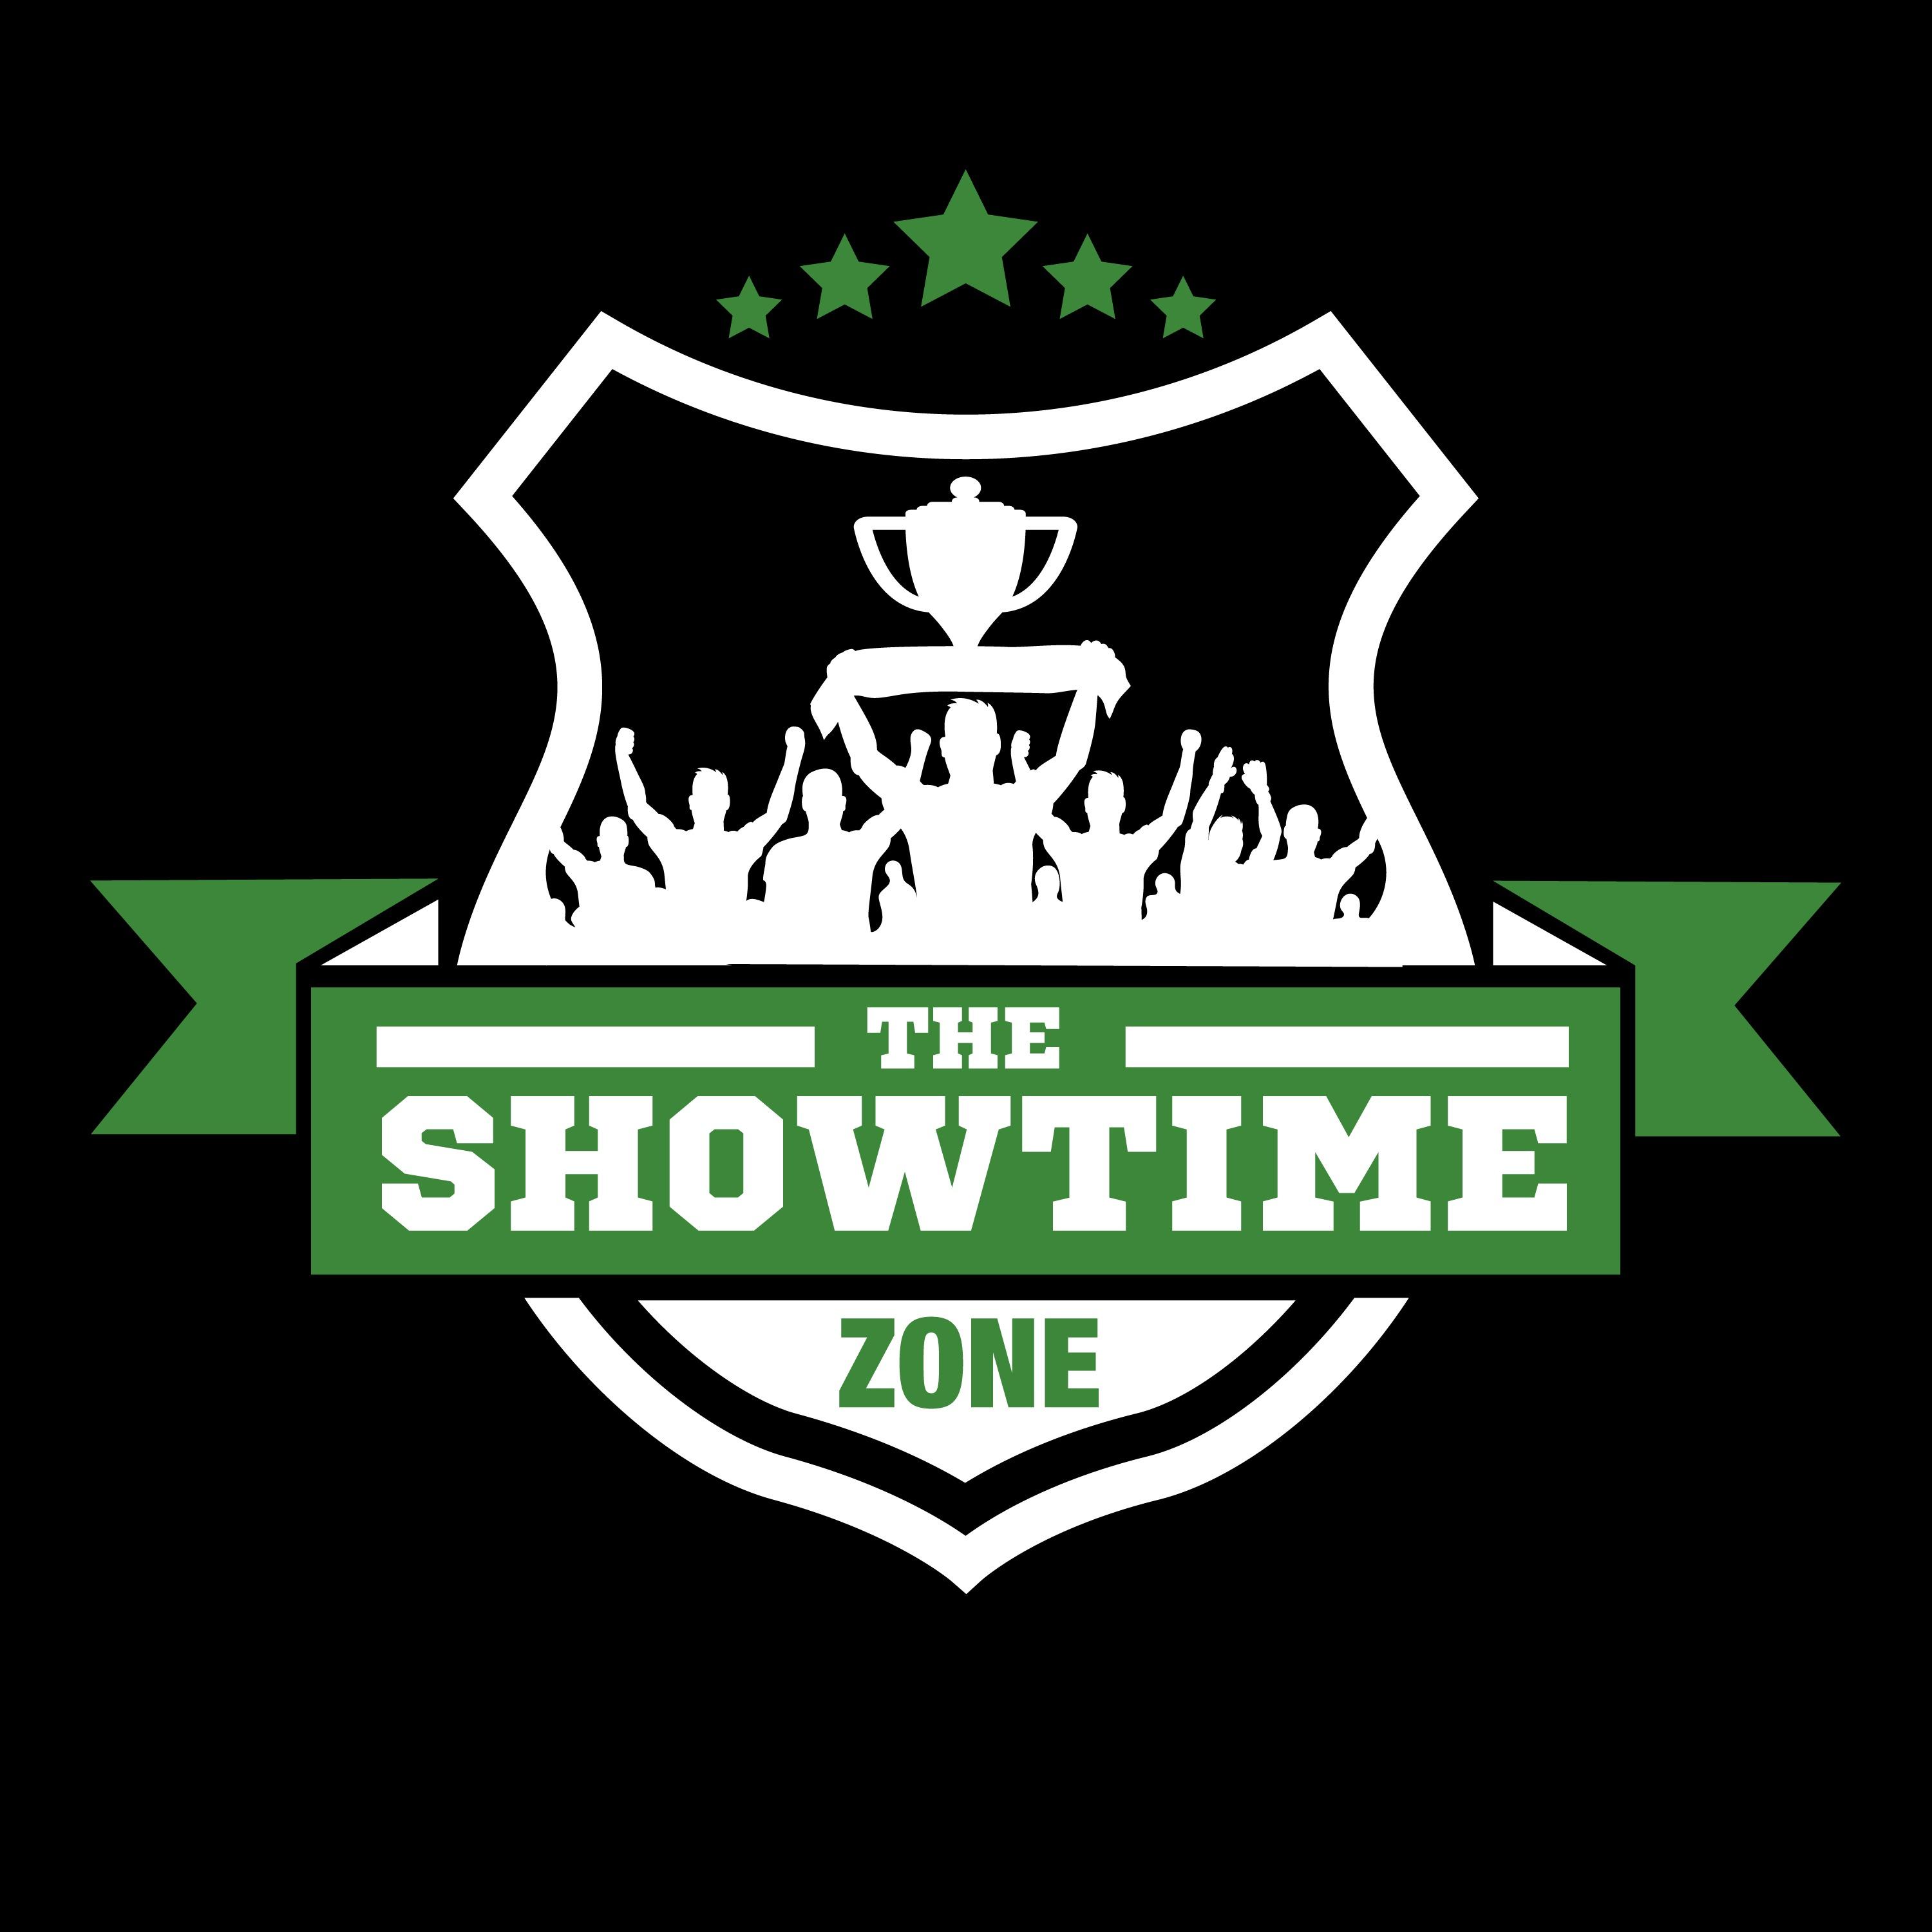 The Showtime Zone